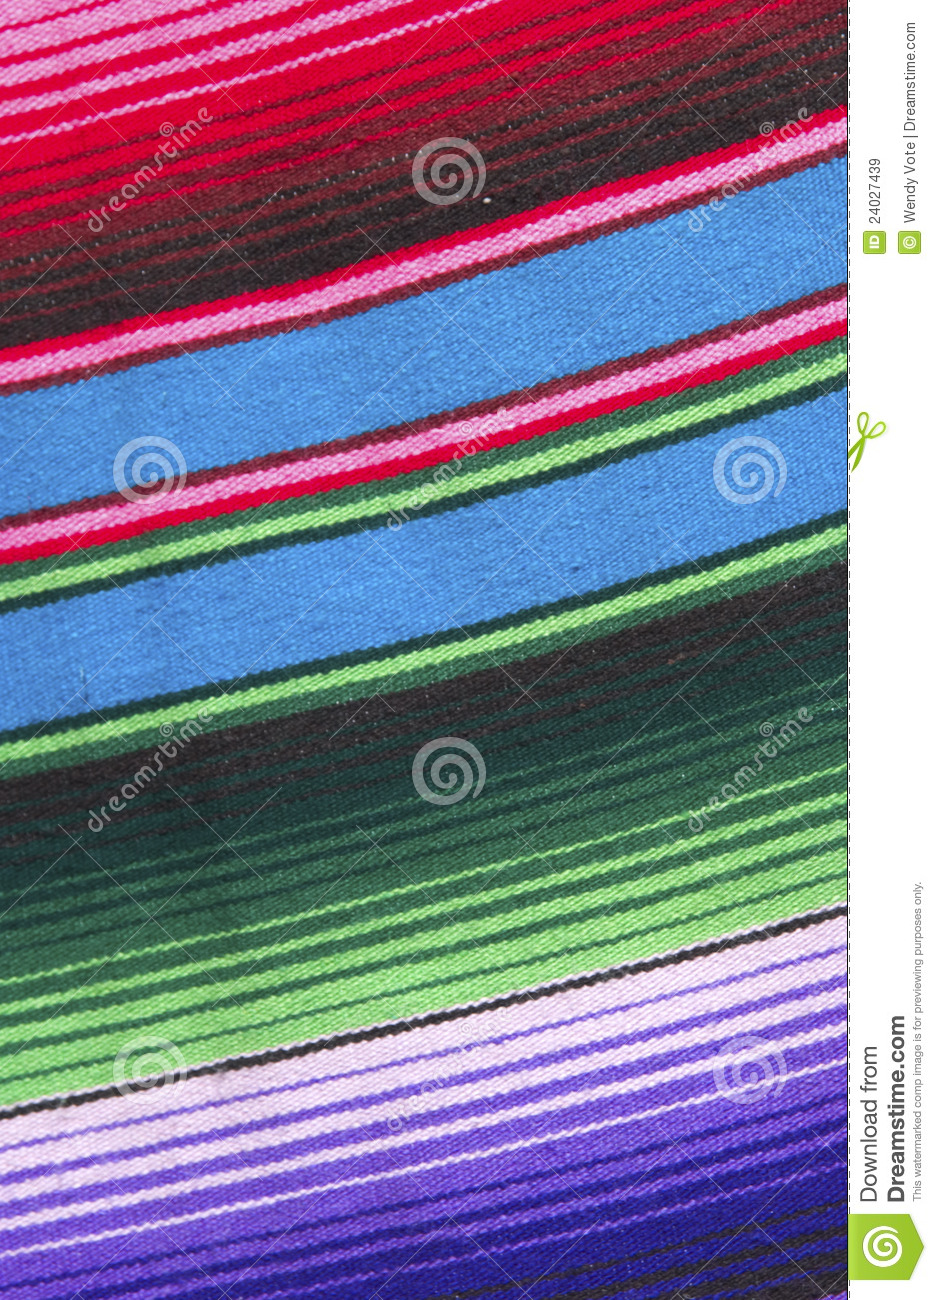 Mexican Blanket Royalty Free Stock Images   Image  24027439